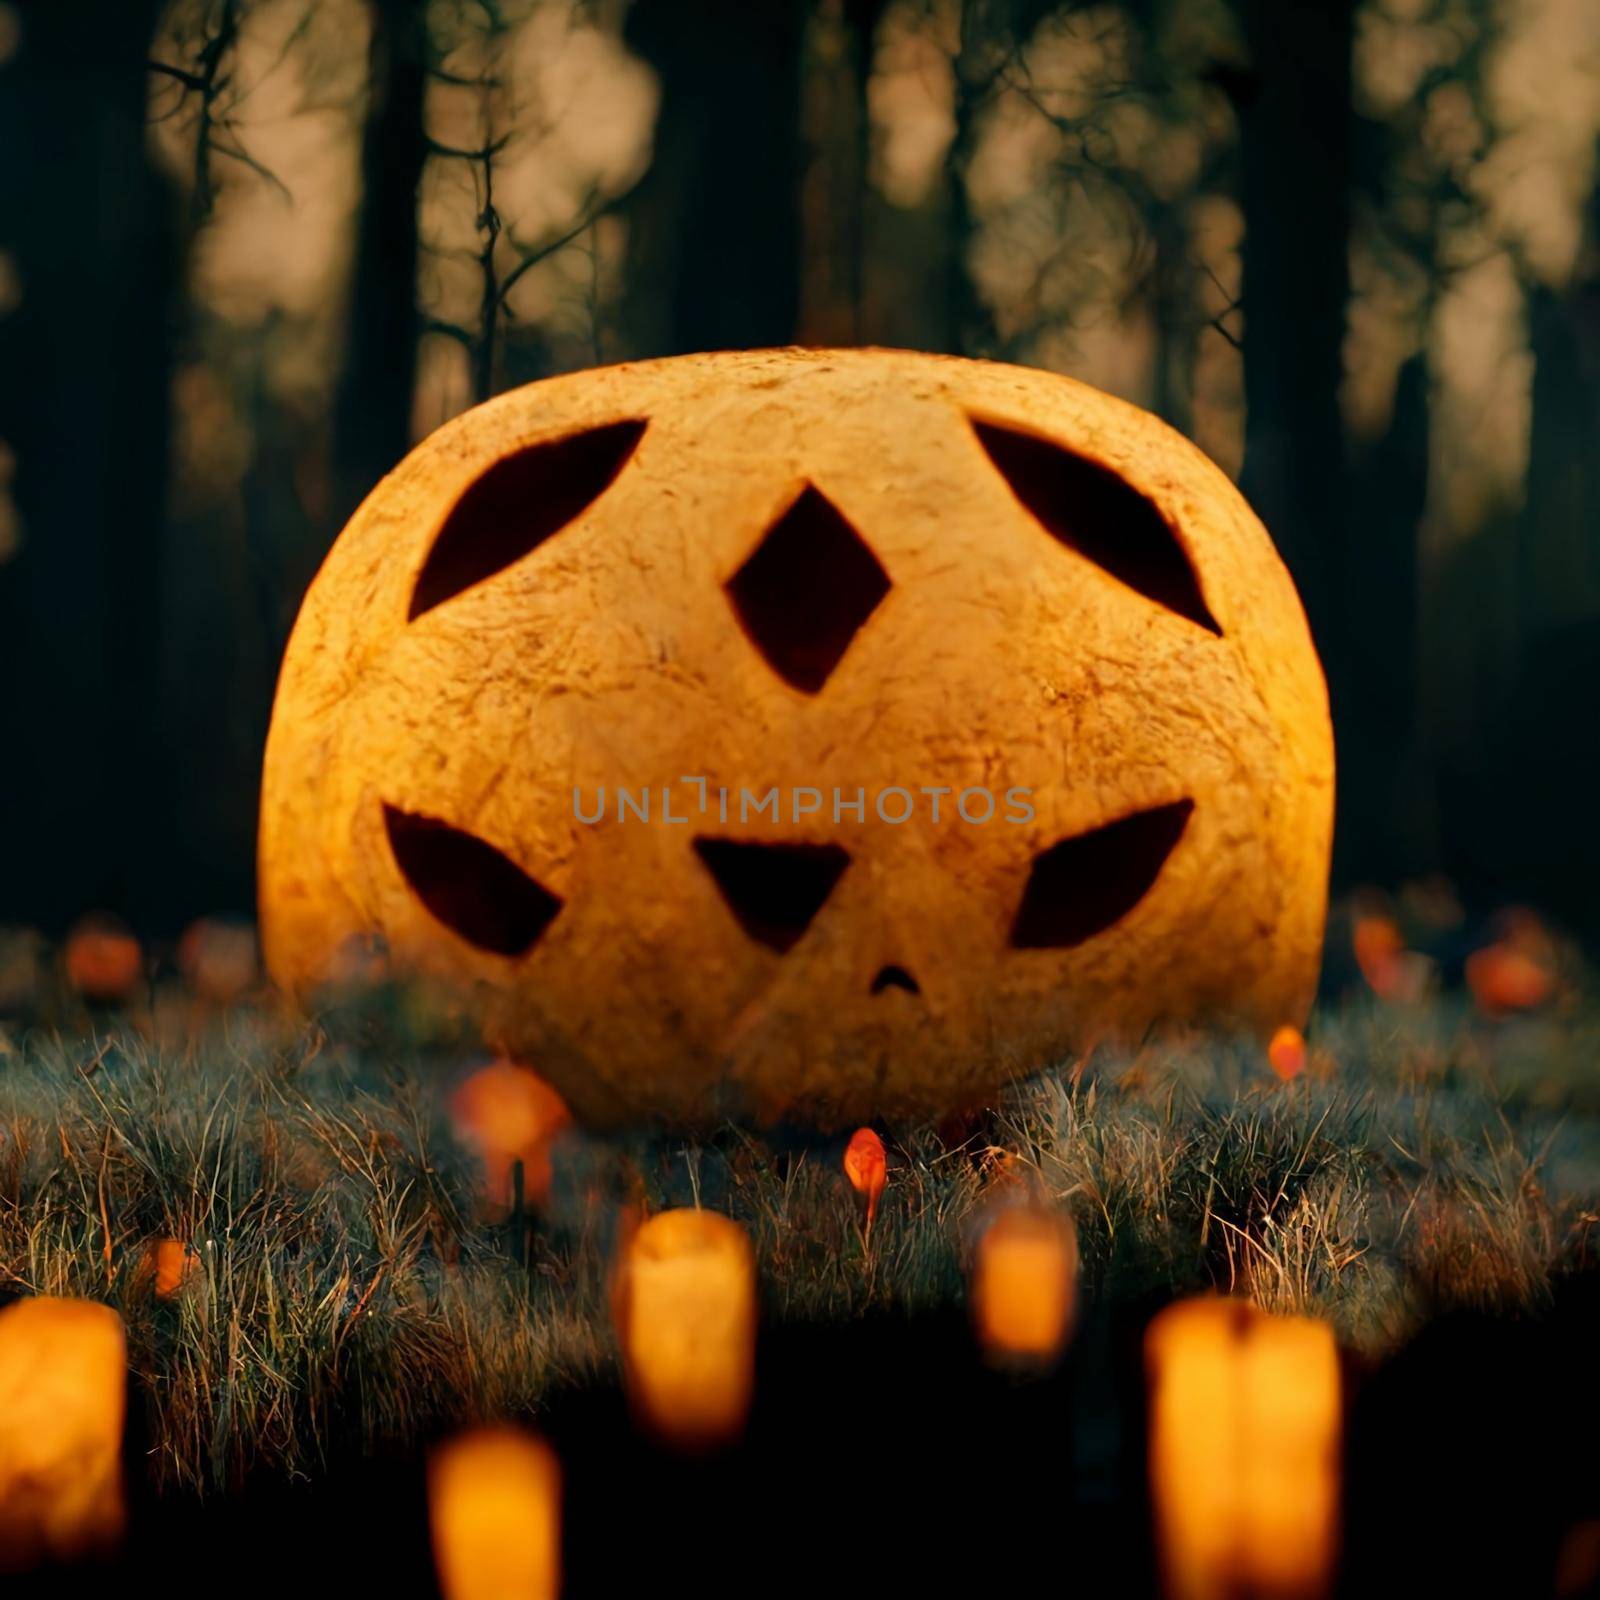 A large orange pumpkin lies on the grass and lanterns burn in a  the forest